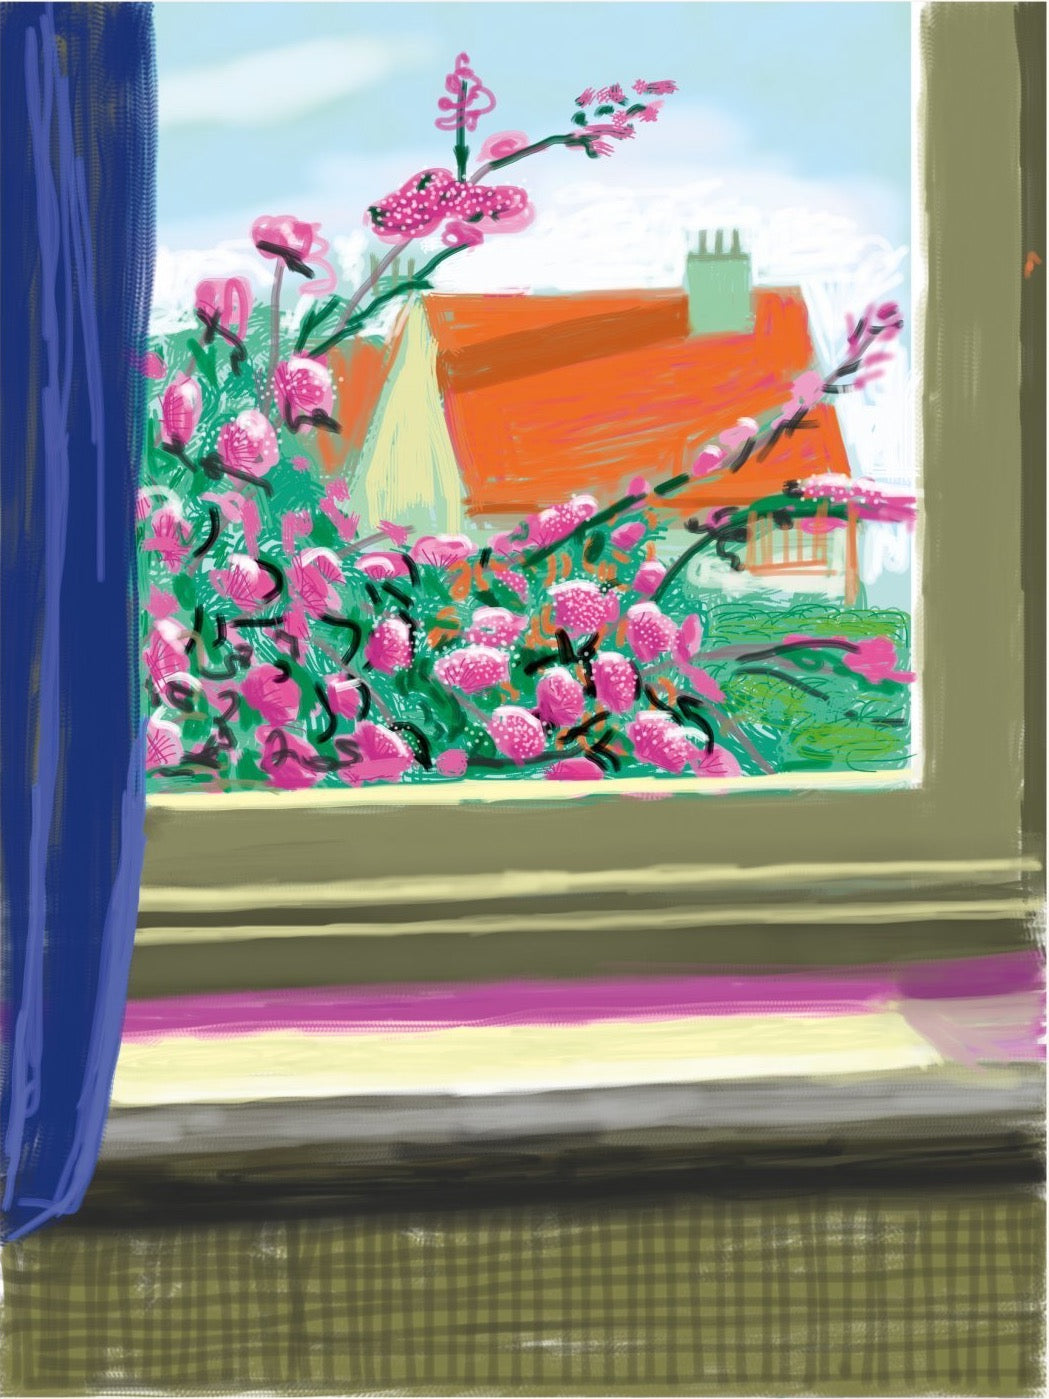 David Hockney My Window: Art Edition D (Nos. 751 to 1,000) with signed print No. 778, 17th April 2011